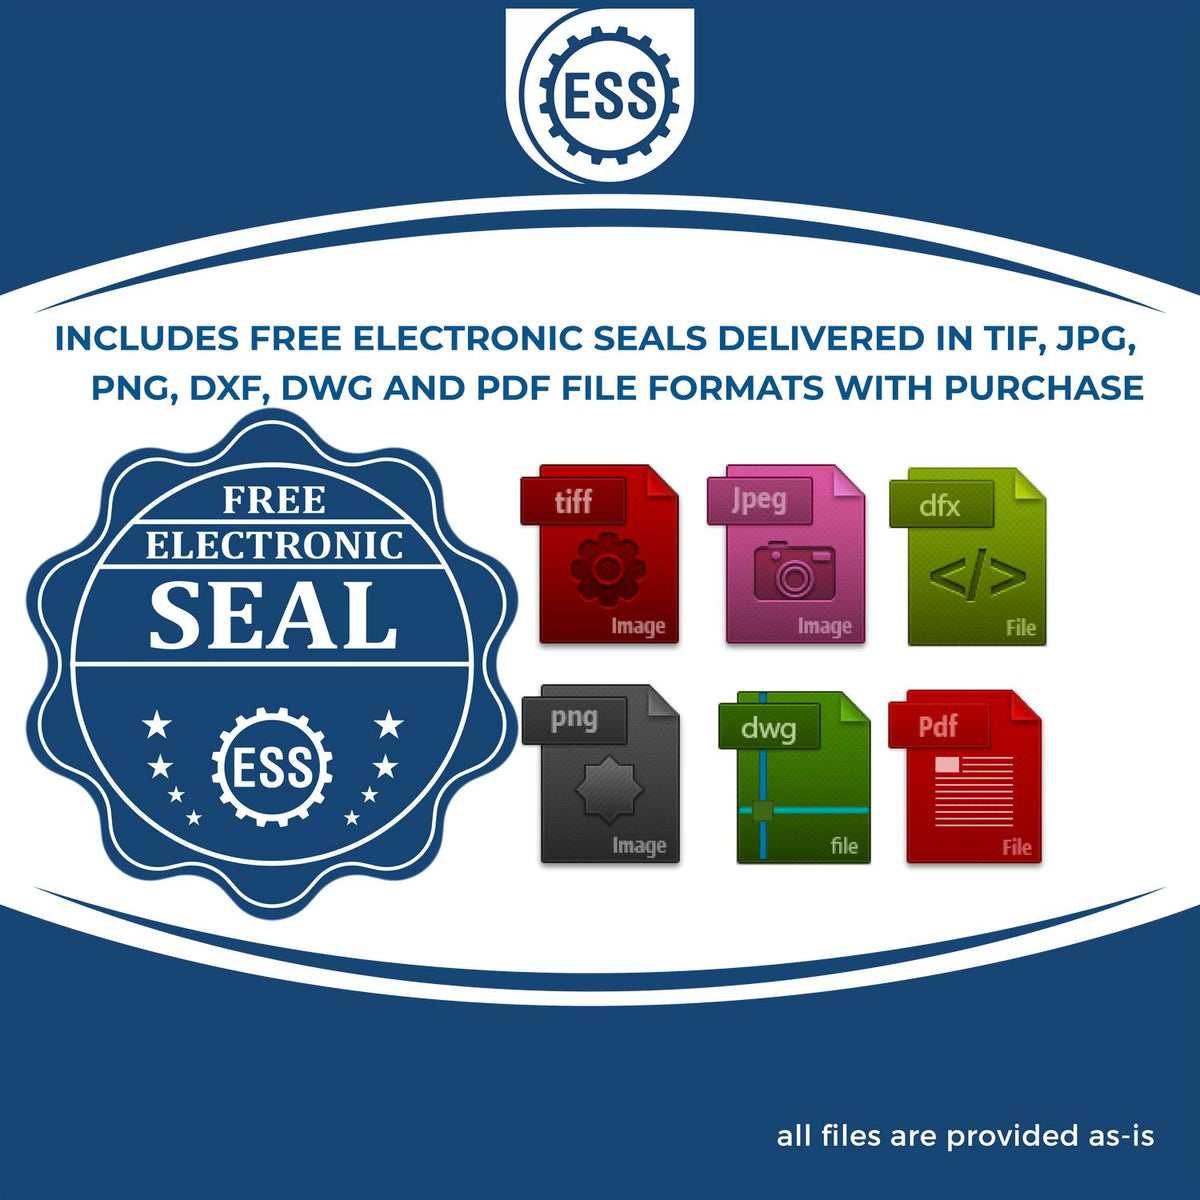 An infographic for the free electronic seal for the Hybrid Arkansas Engineer Seal illustrating the different file type icons such as DXF, DWG, TIF, JPG and PNG.